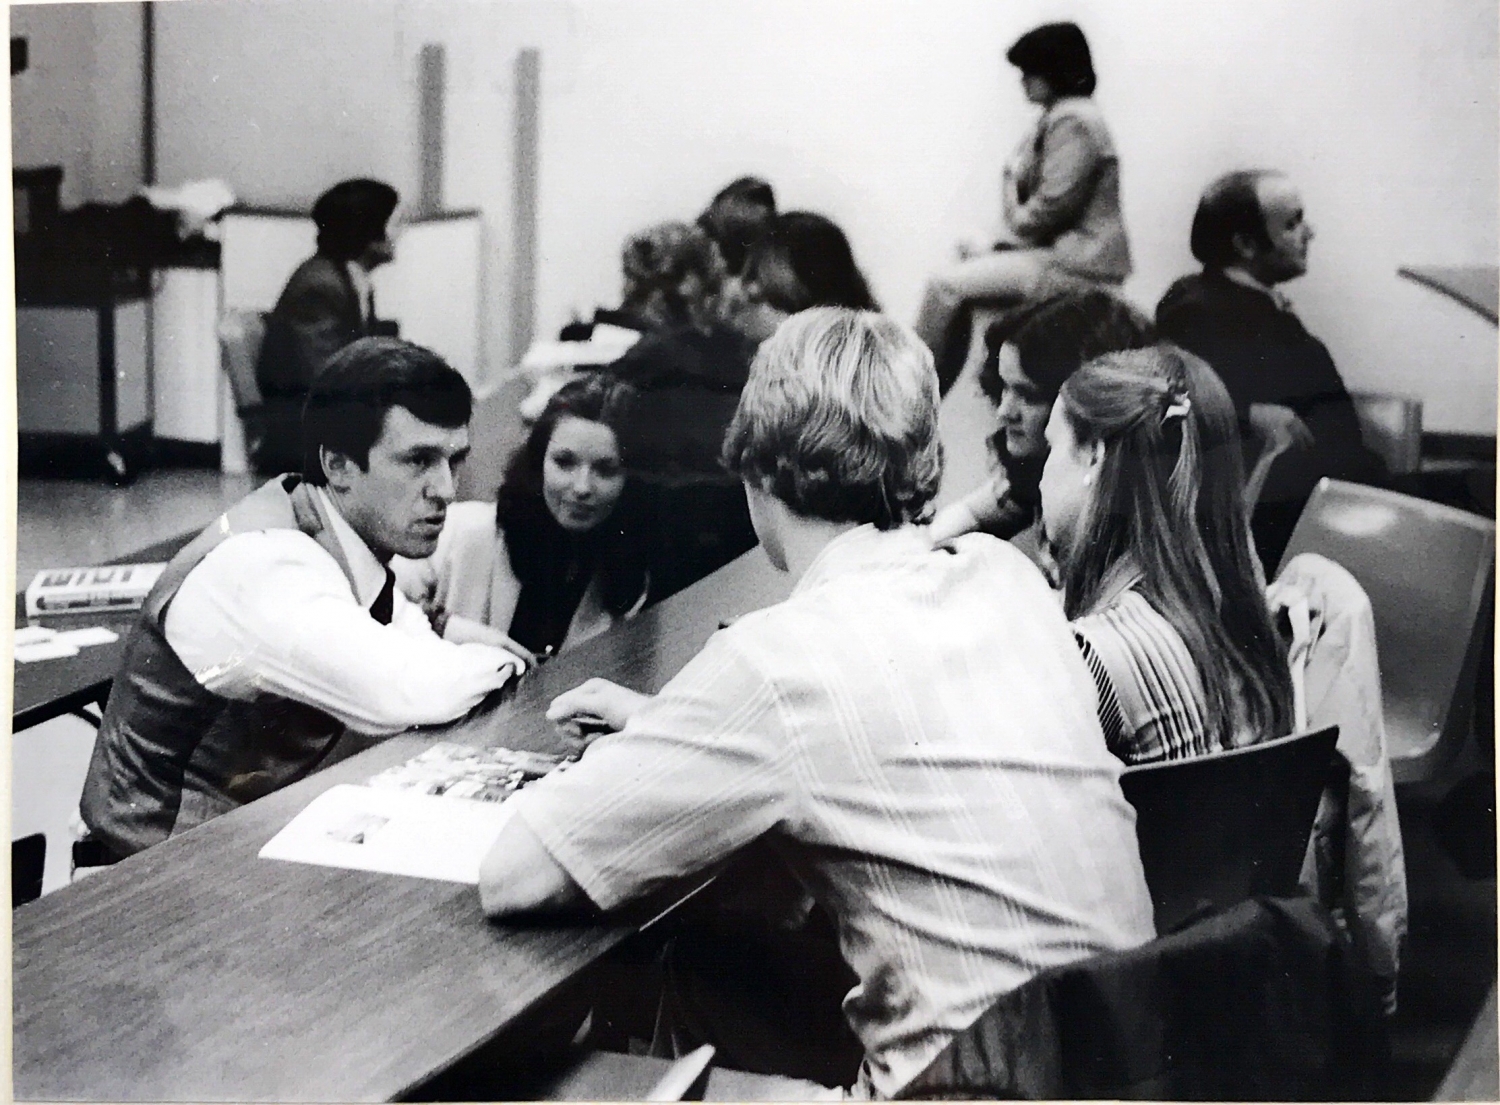 Meet the Firms event at Bowling Green State University in 1980